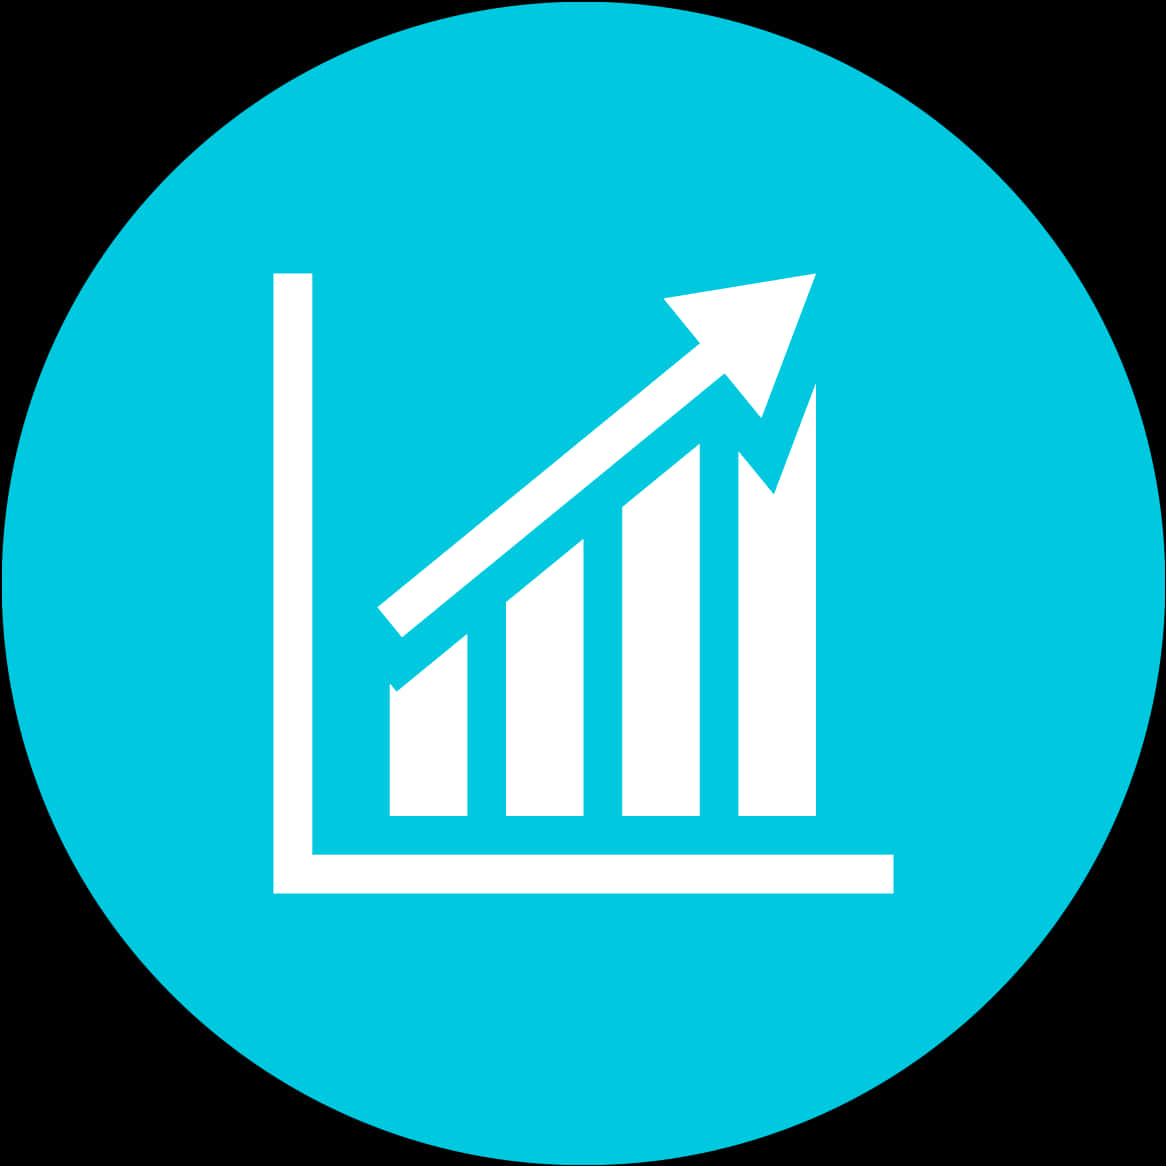 Growth Chart Icon Cyan Background